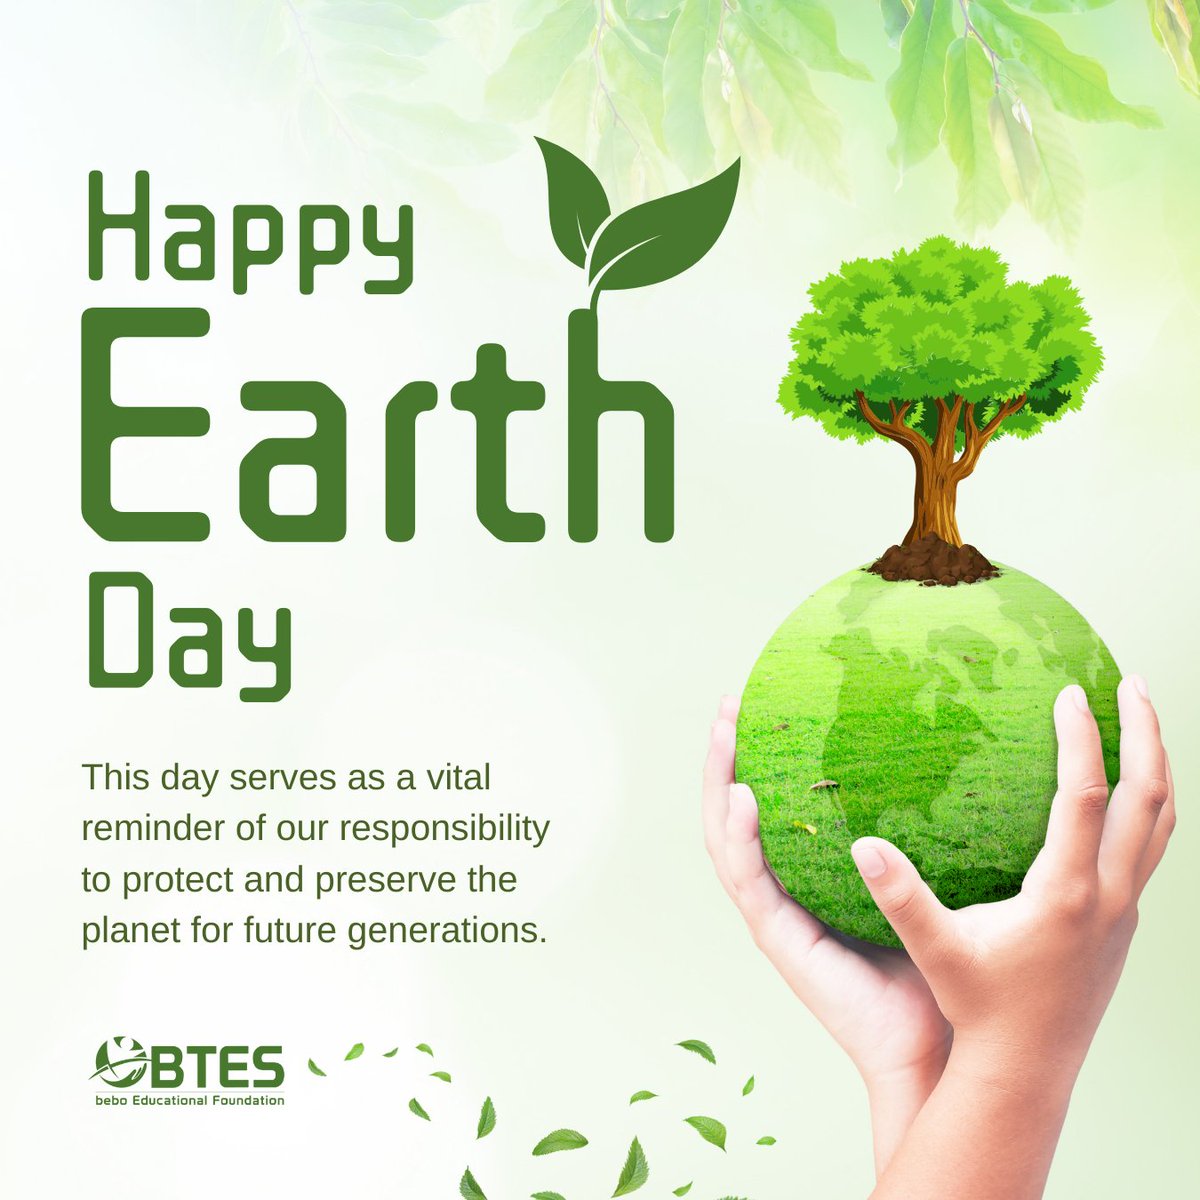 Join BTES in honoring Earth Day by embracing eco-friendly practices and promoting environmental awareness. Together, we can protect our planet.

#EarthDay #EarthDay2024 #ProtectOurPlanet #GoGreen #beboTechnologies #BTES